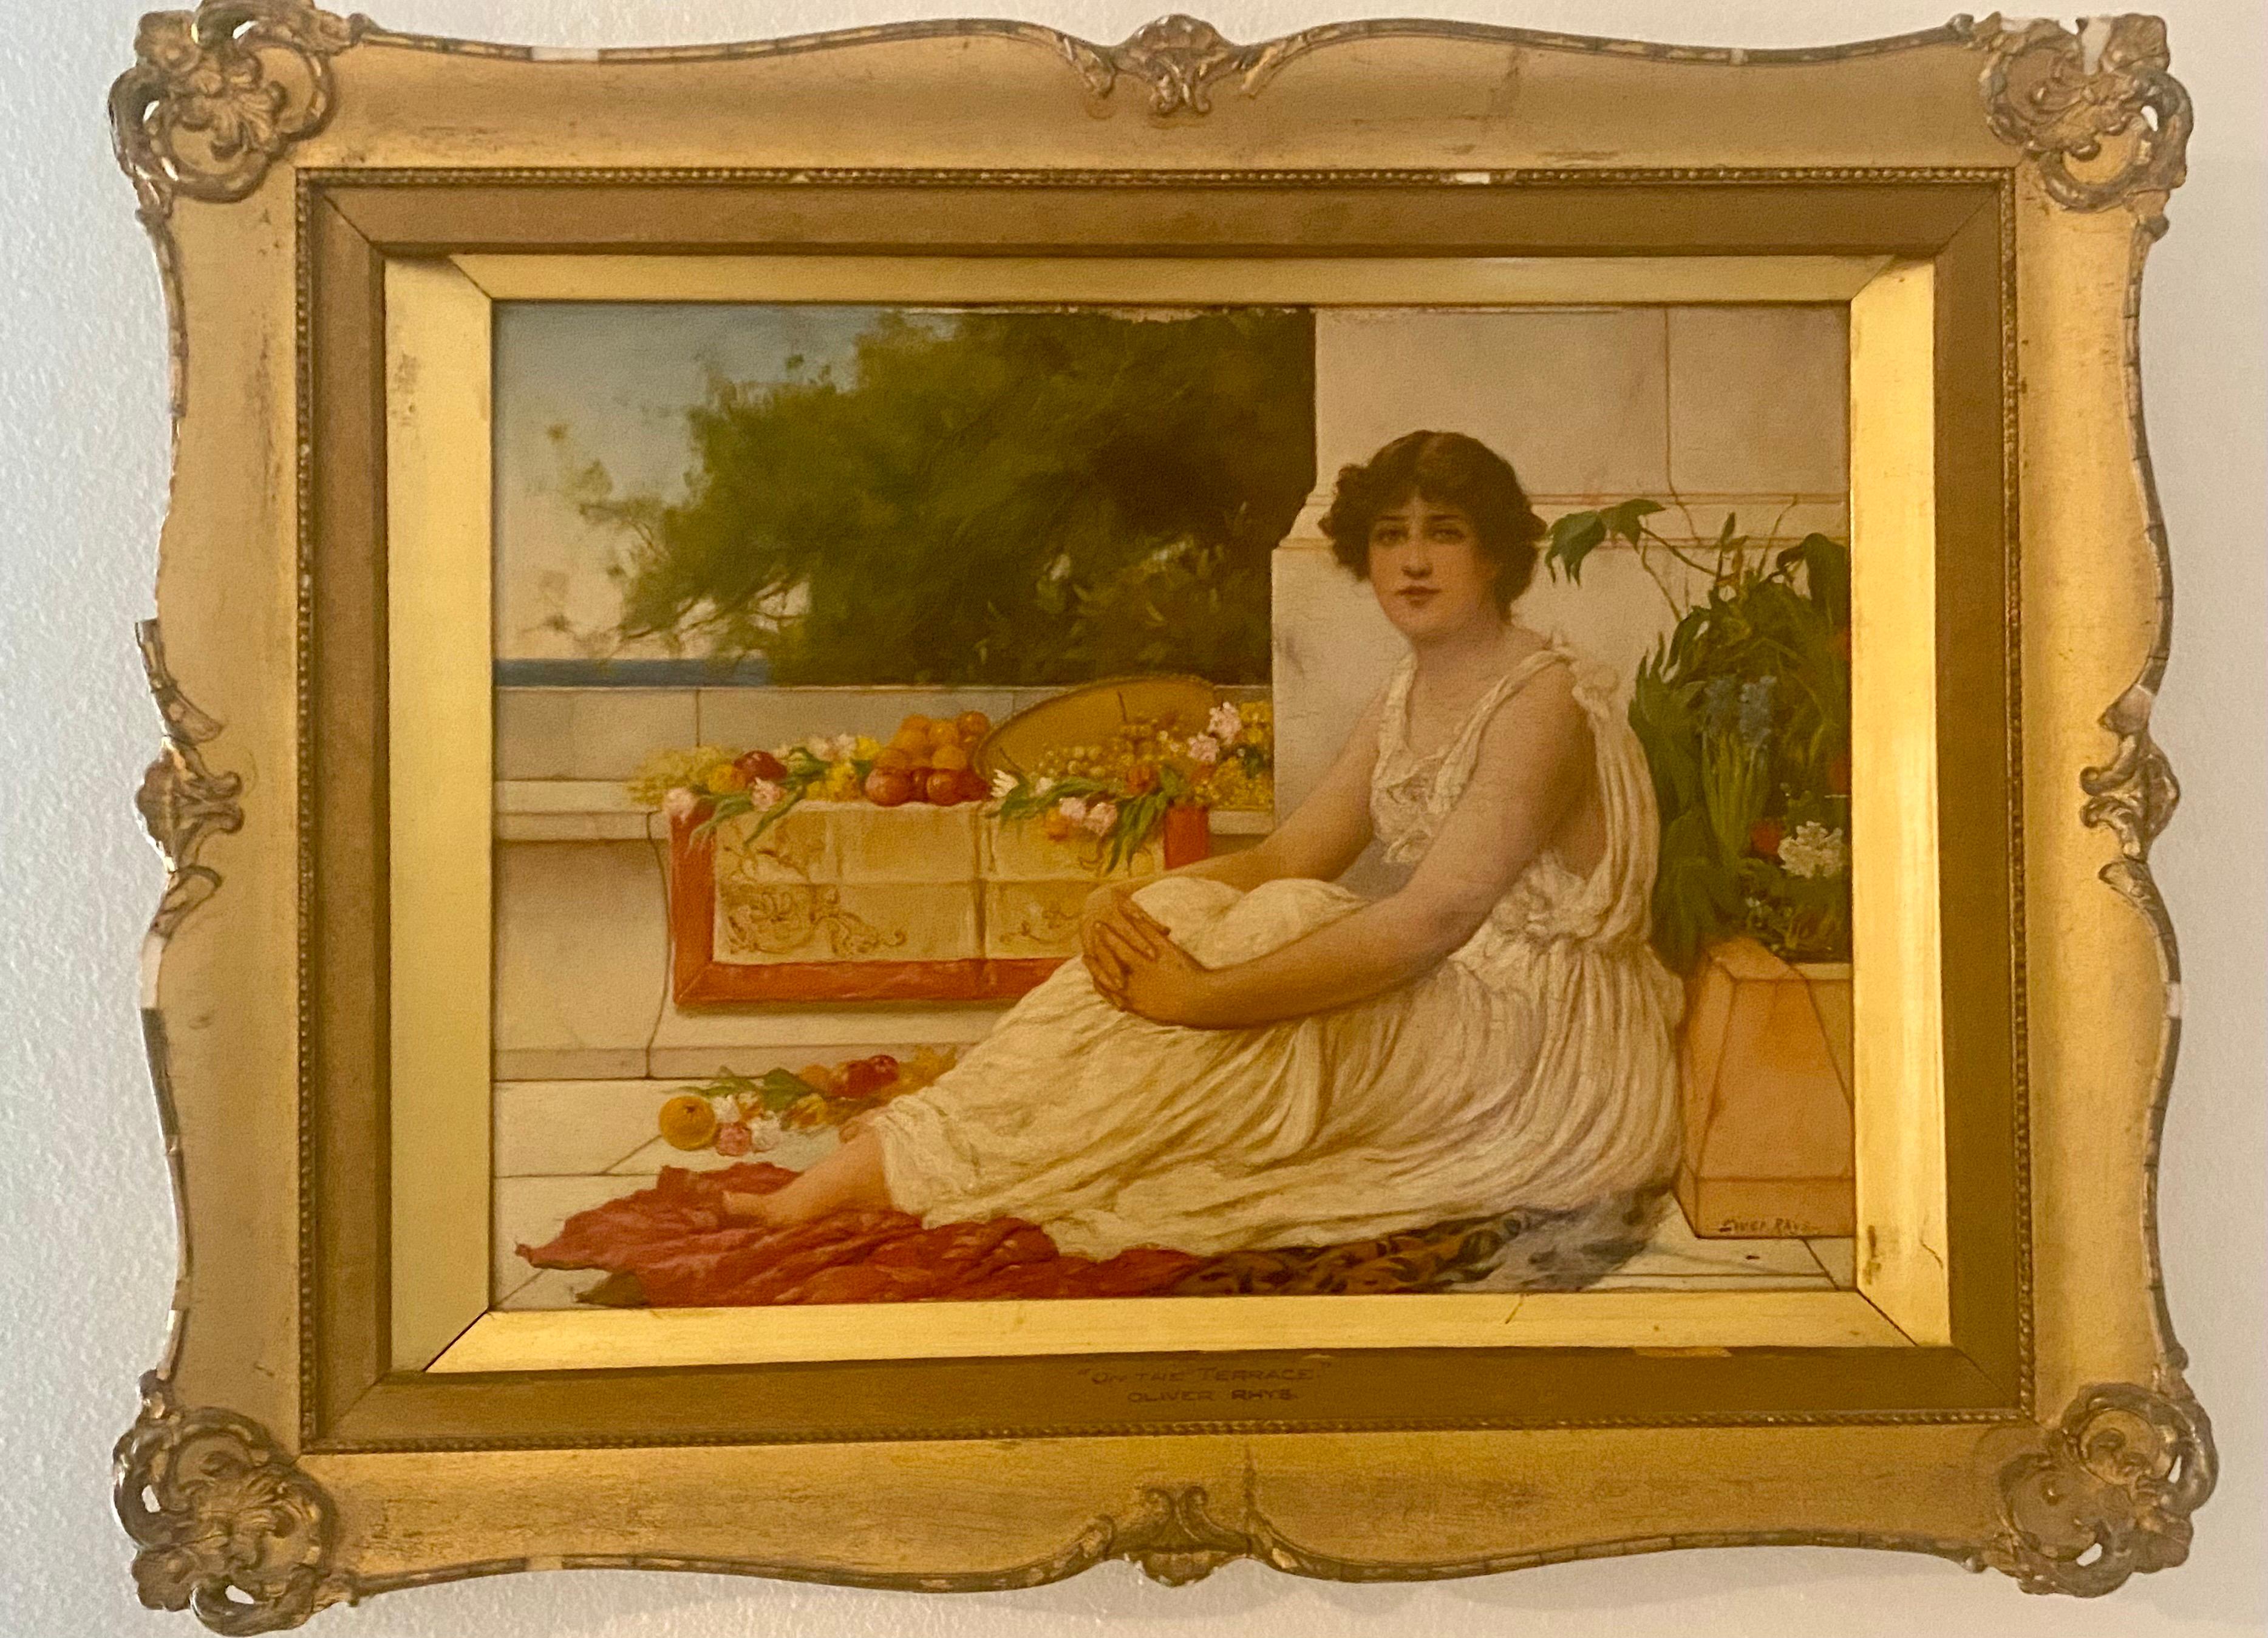 A lovely terrace scene of a stunning young lady draped in classical dress with a rich background of the sea, trees, flowers, fruits and fabrics, painted with oil on canvas by Oliver Rhys, British, 1854-1907, signed, in original gilded wood frame.